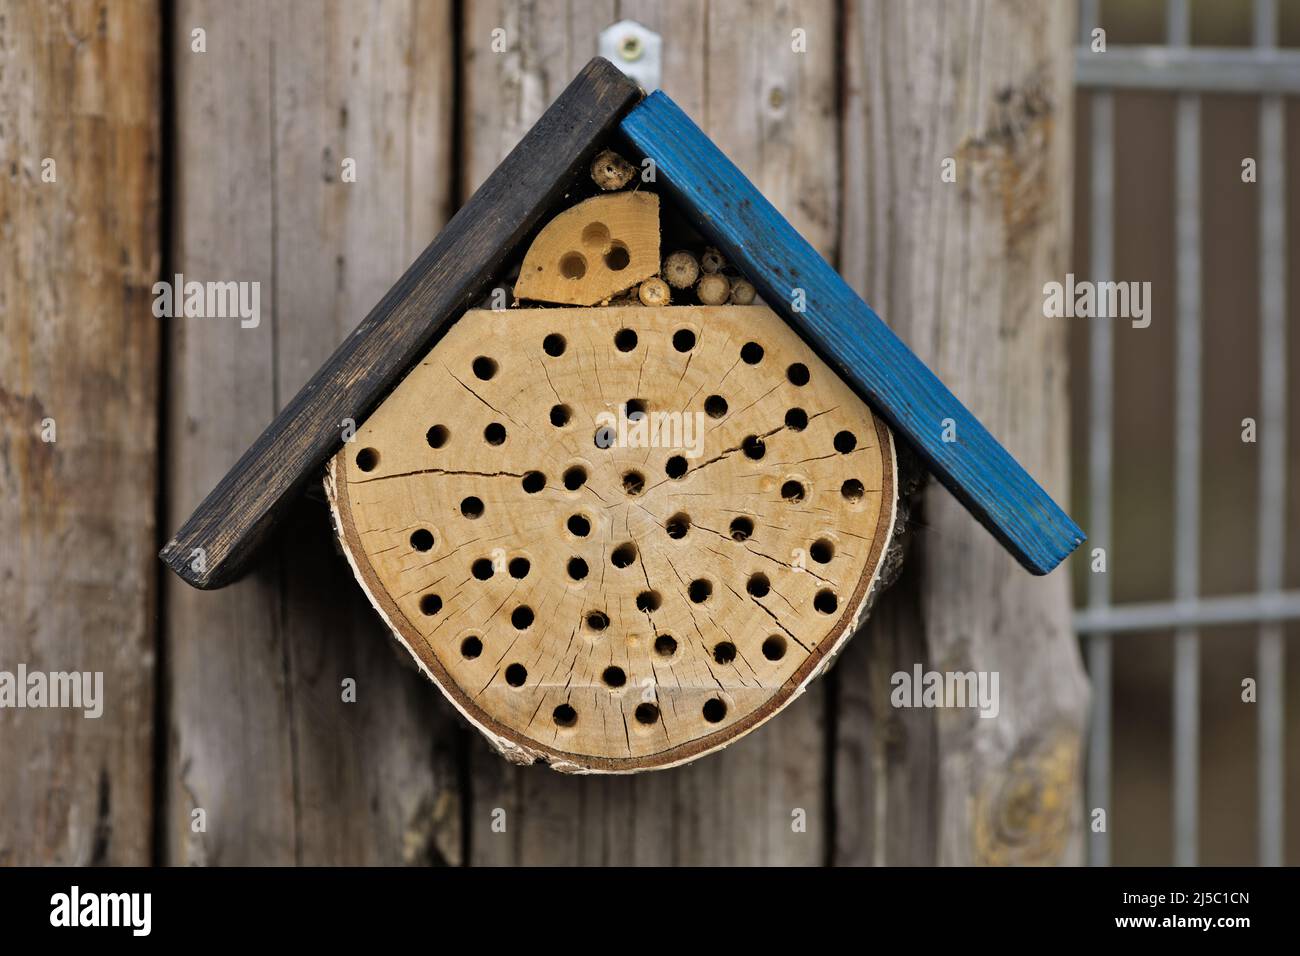 An insect hotel (bee hotel) made of drilled wood Stock Photo